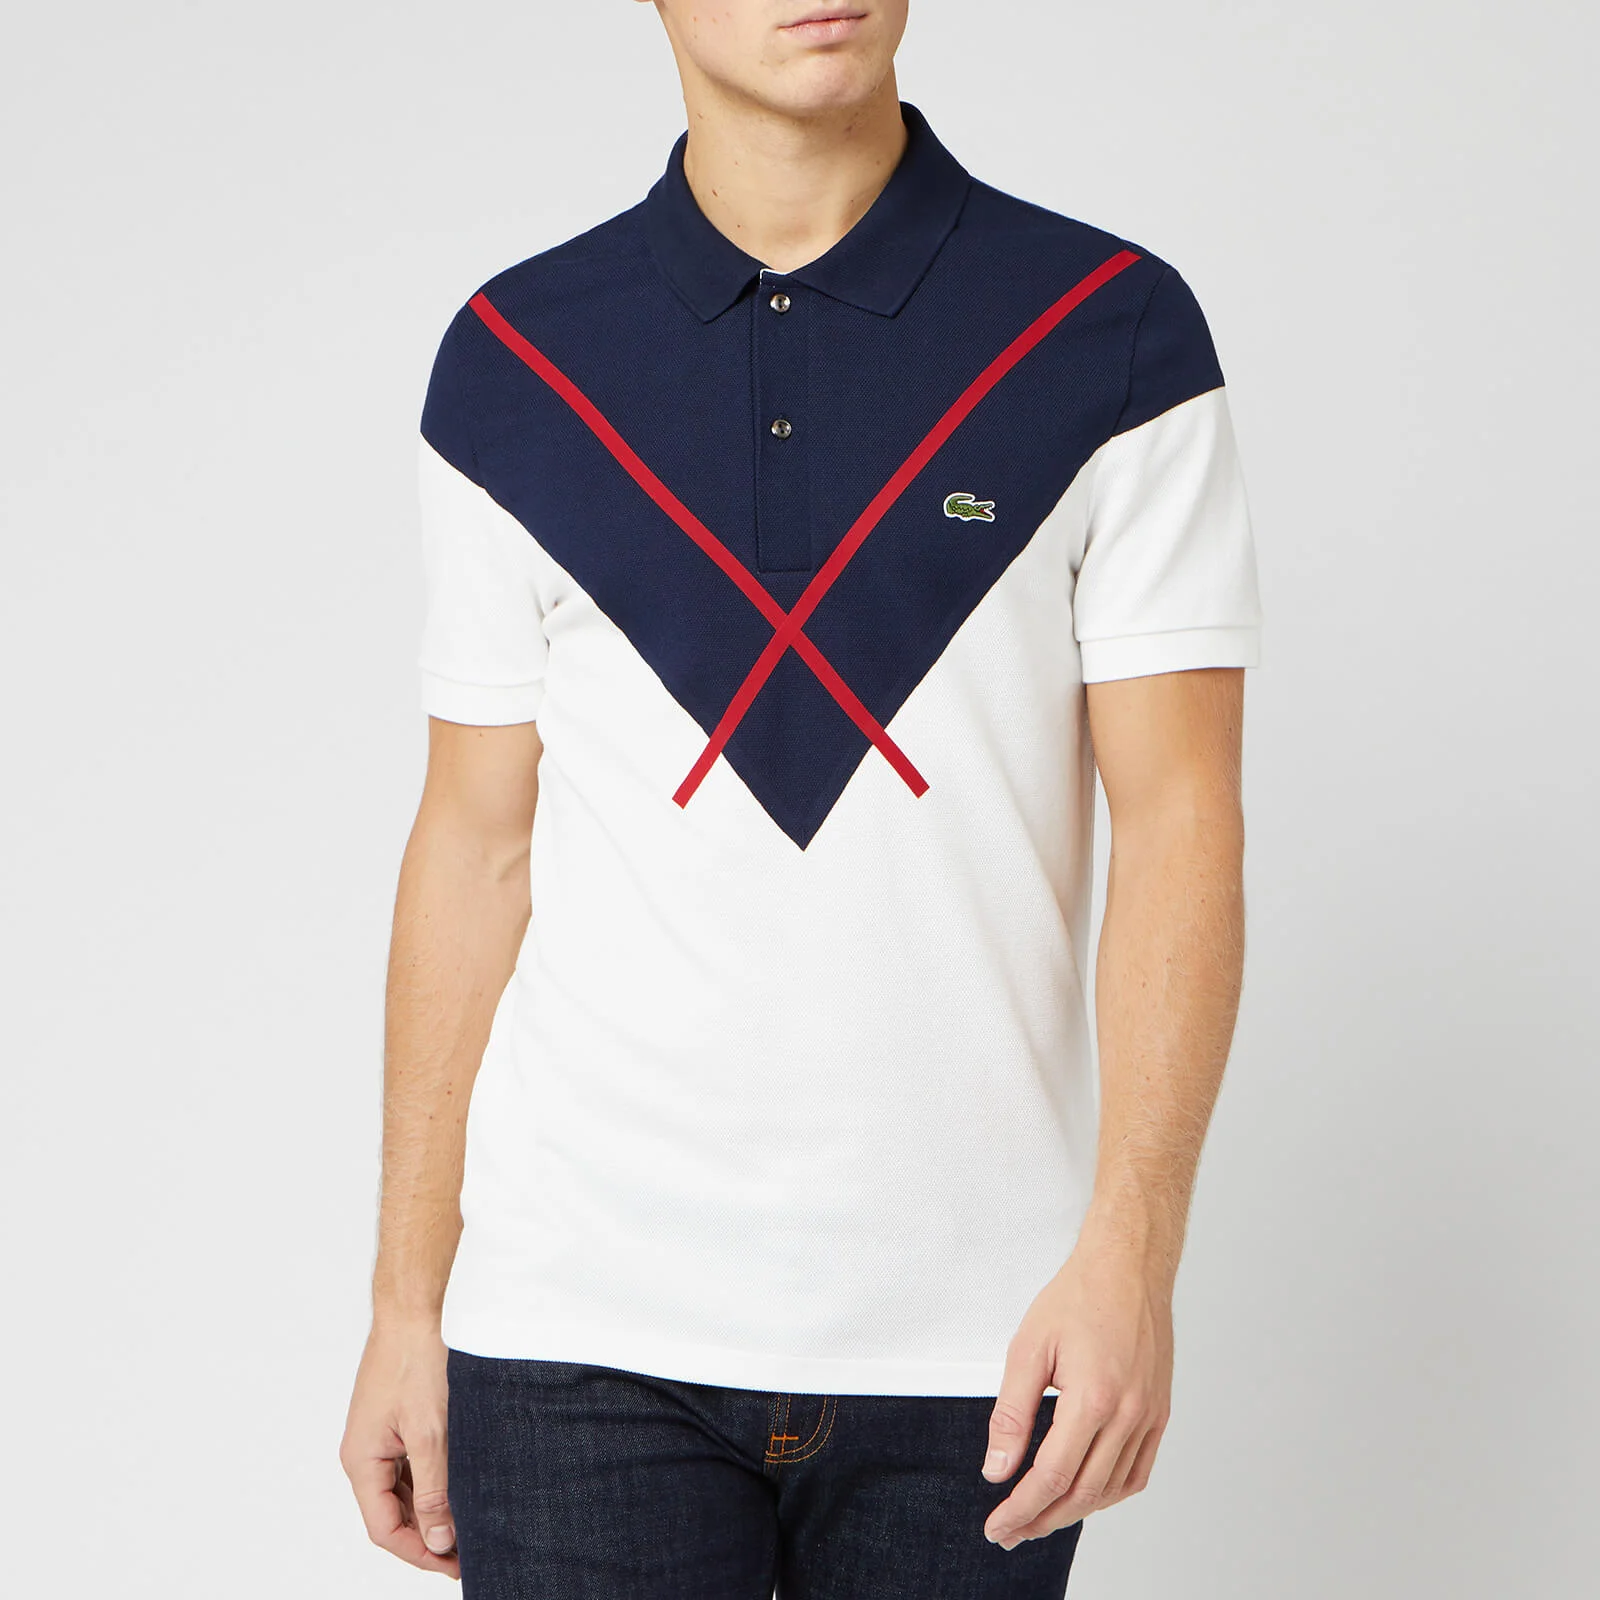 Lacoste Men's Short Sleeve Made in France Polo Shirt - Farine Image 1